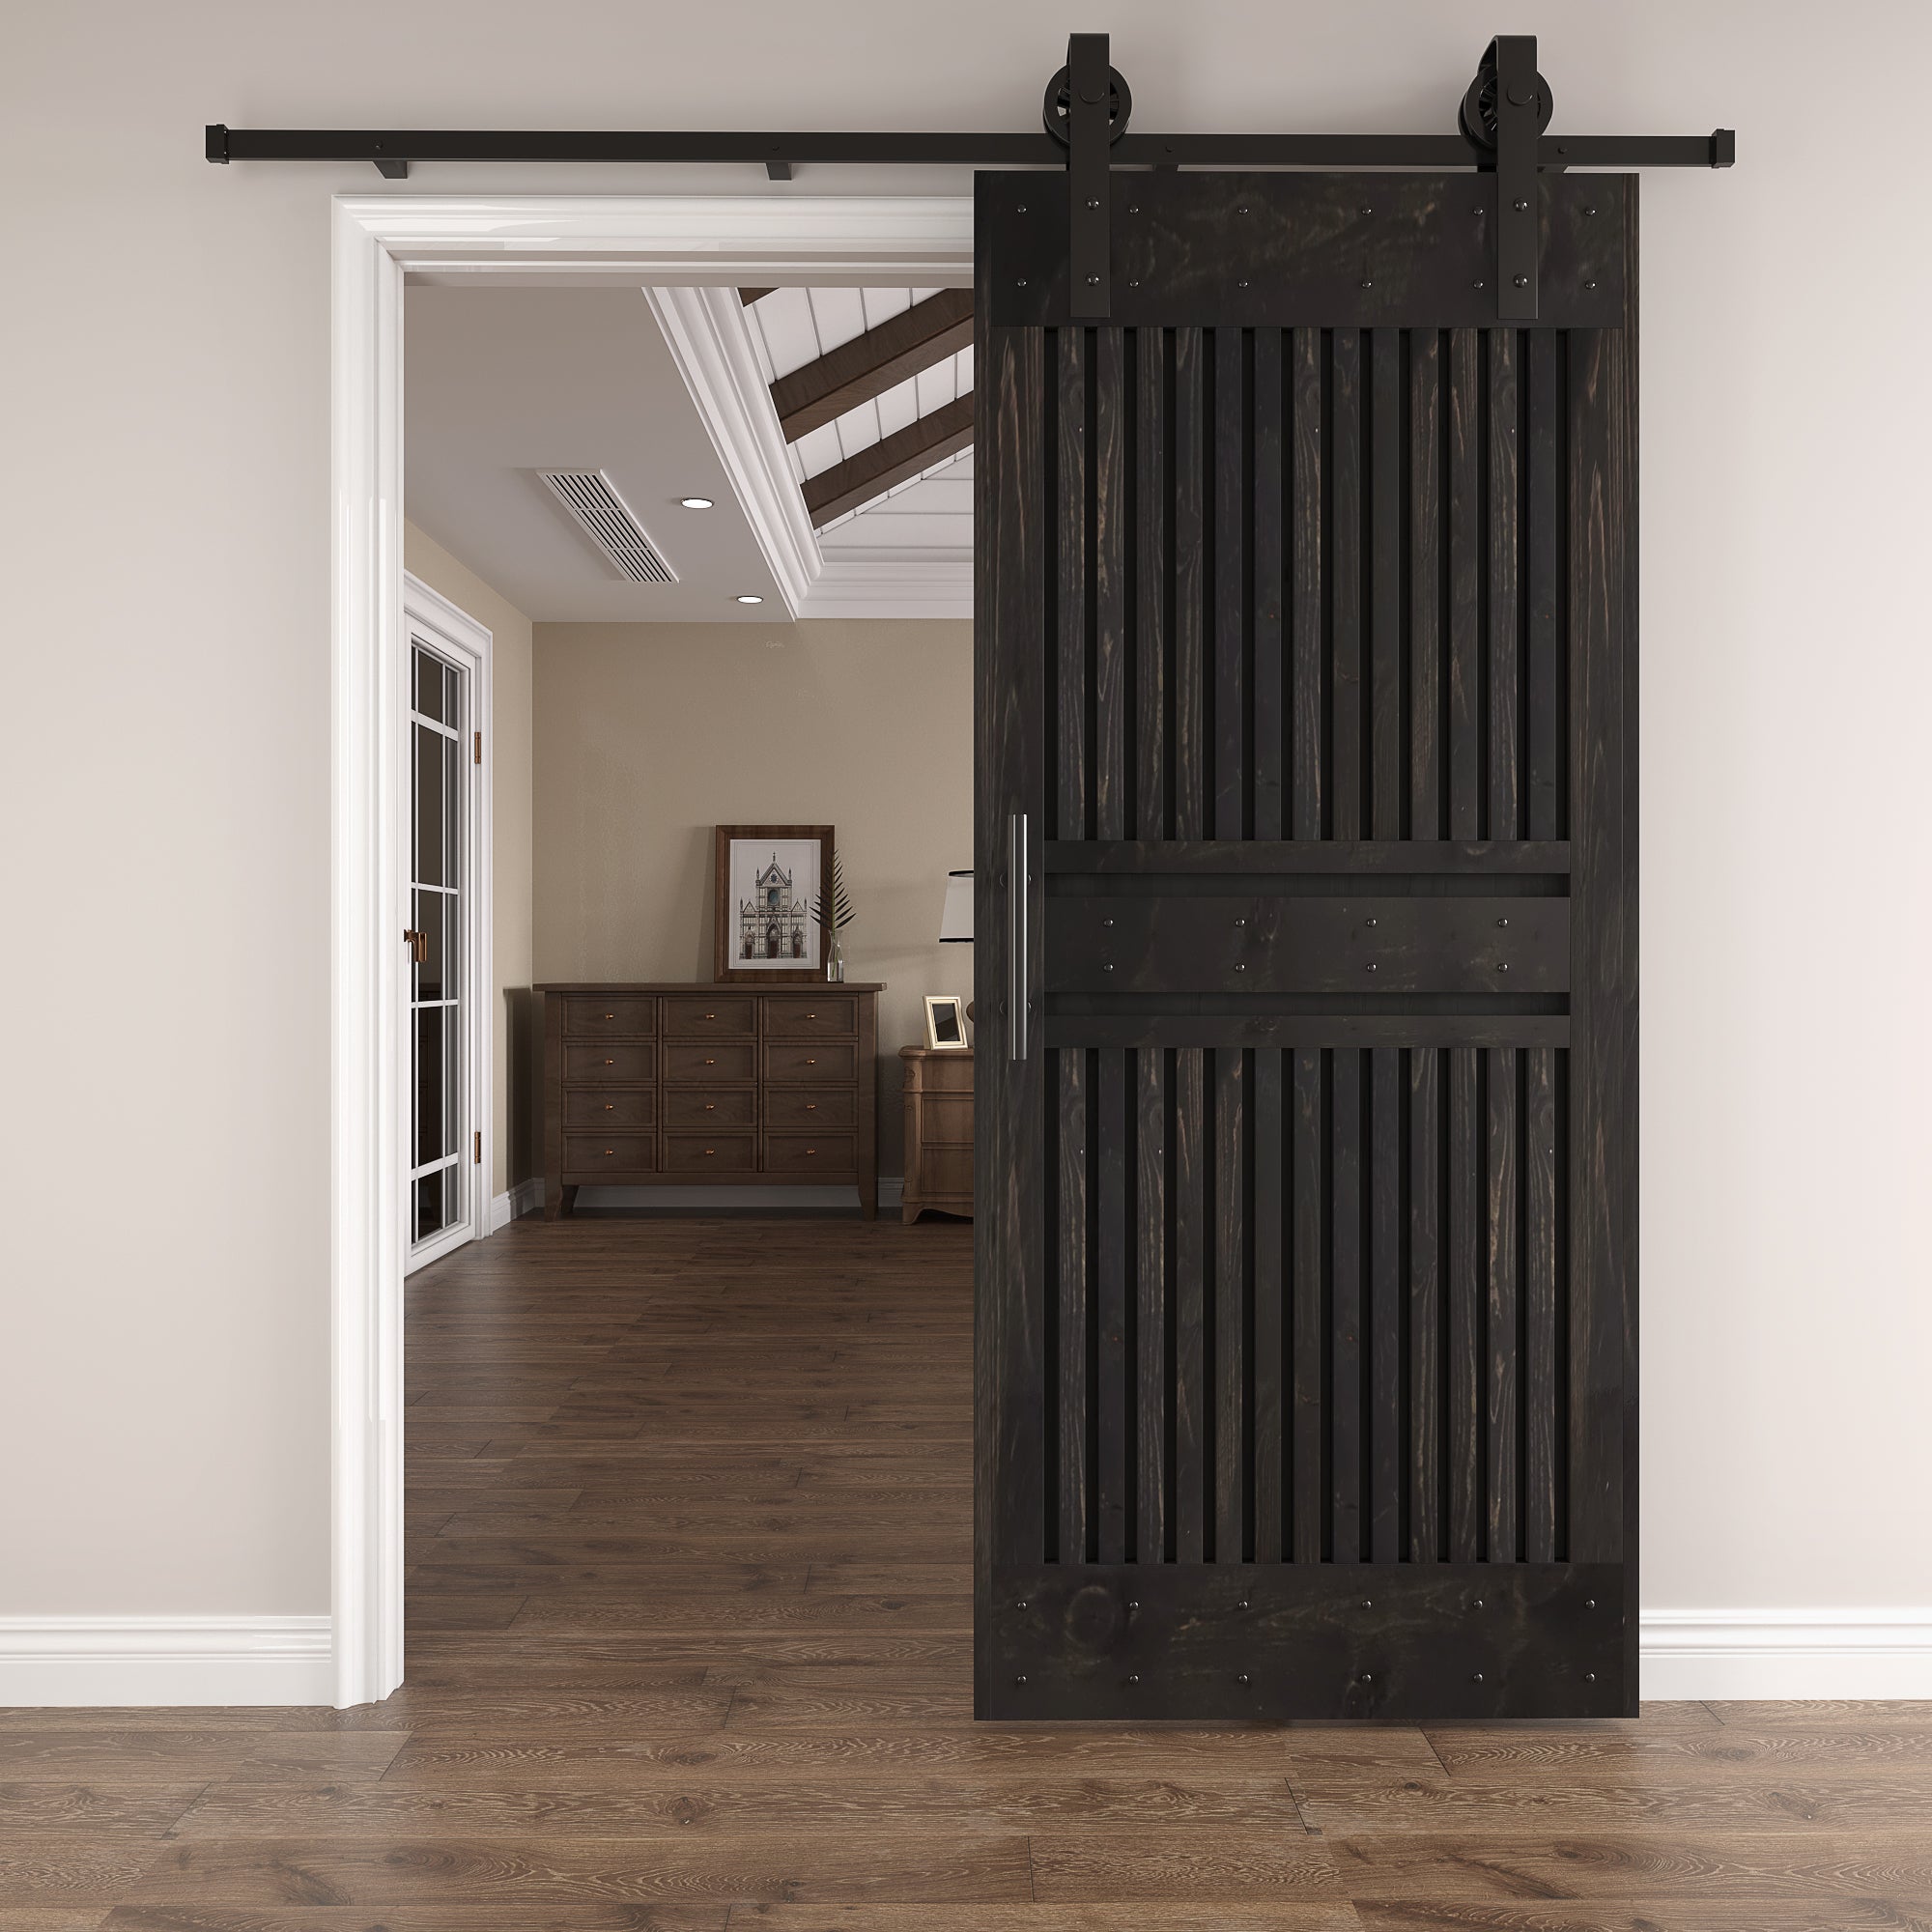 36in. x 84.in Half Grille Screwed Design Embossing Knotty Wood Sliding Barn Door With Hardware Kit